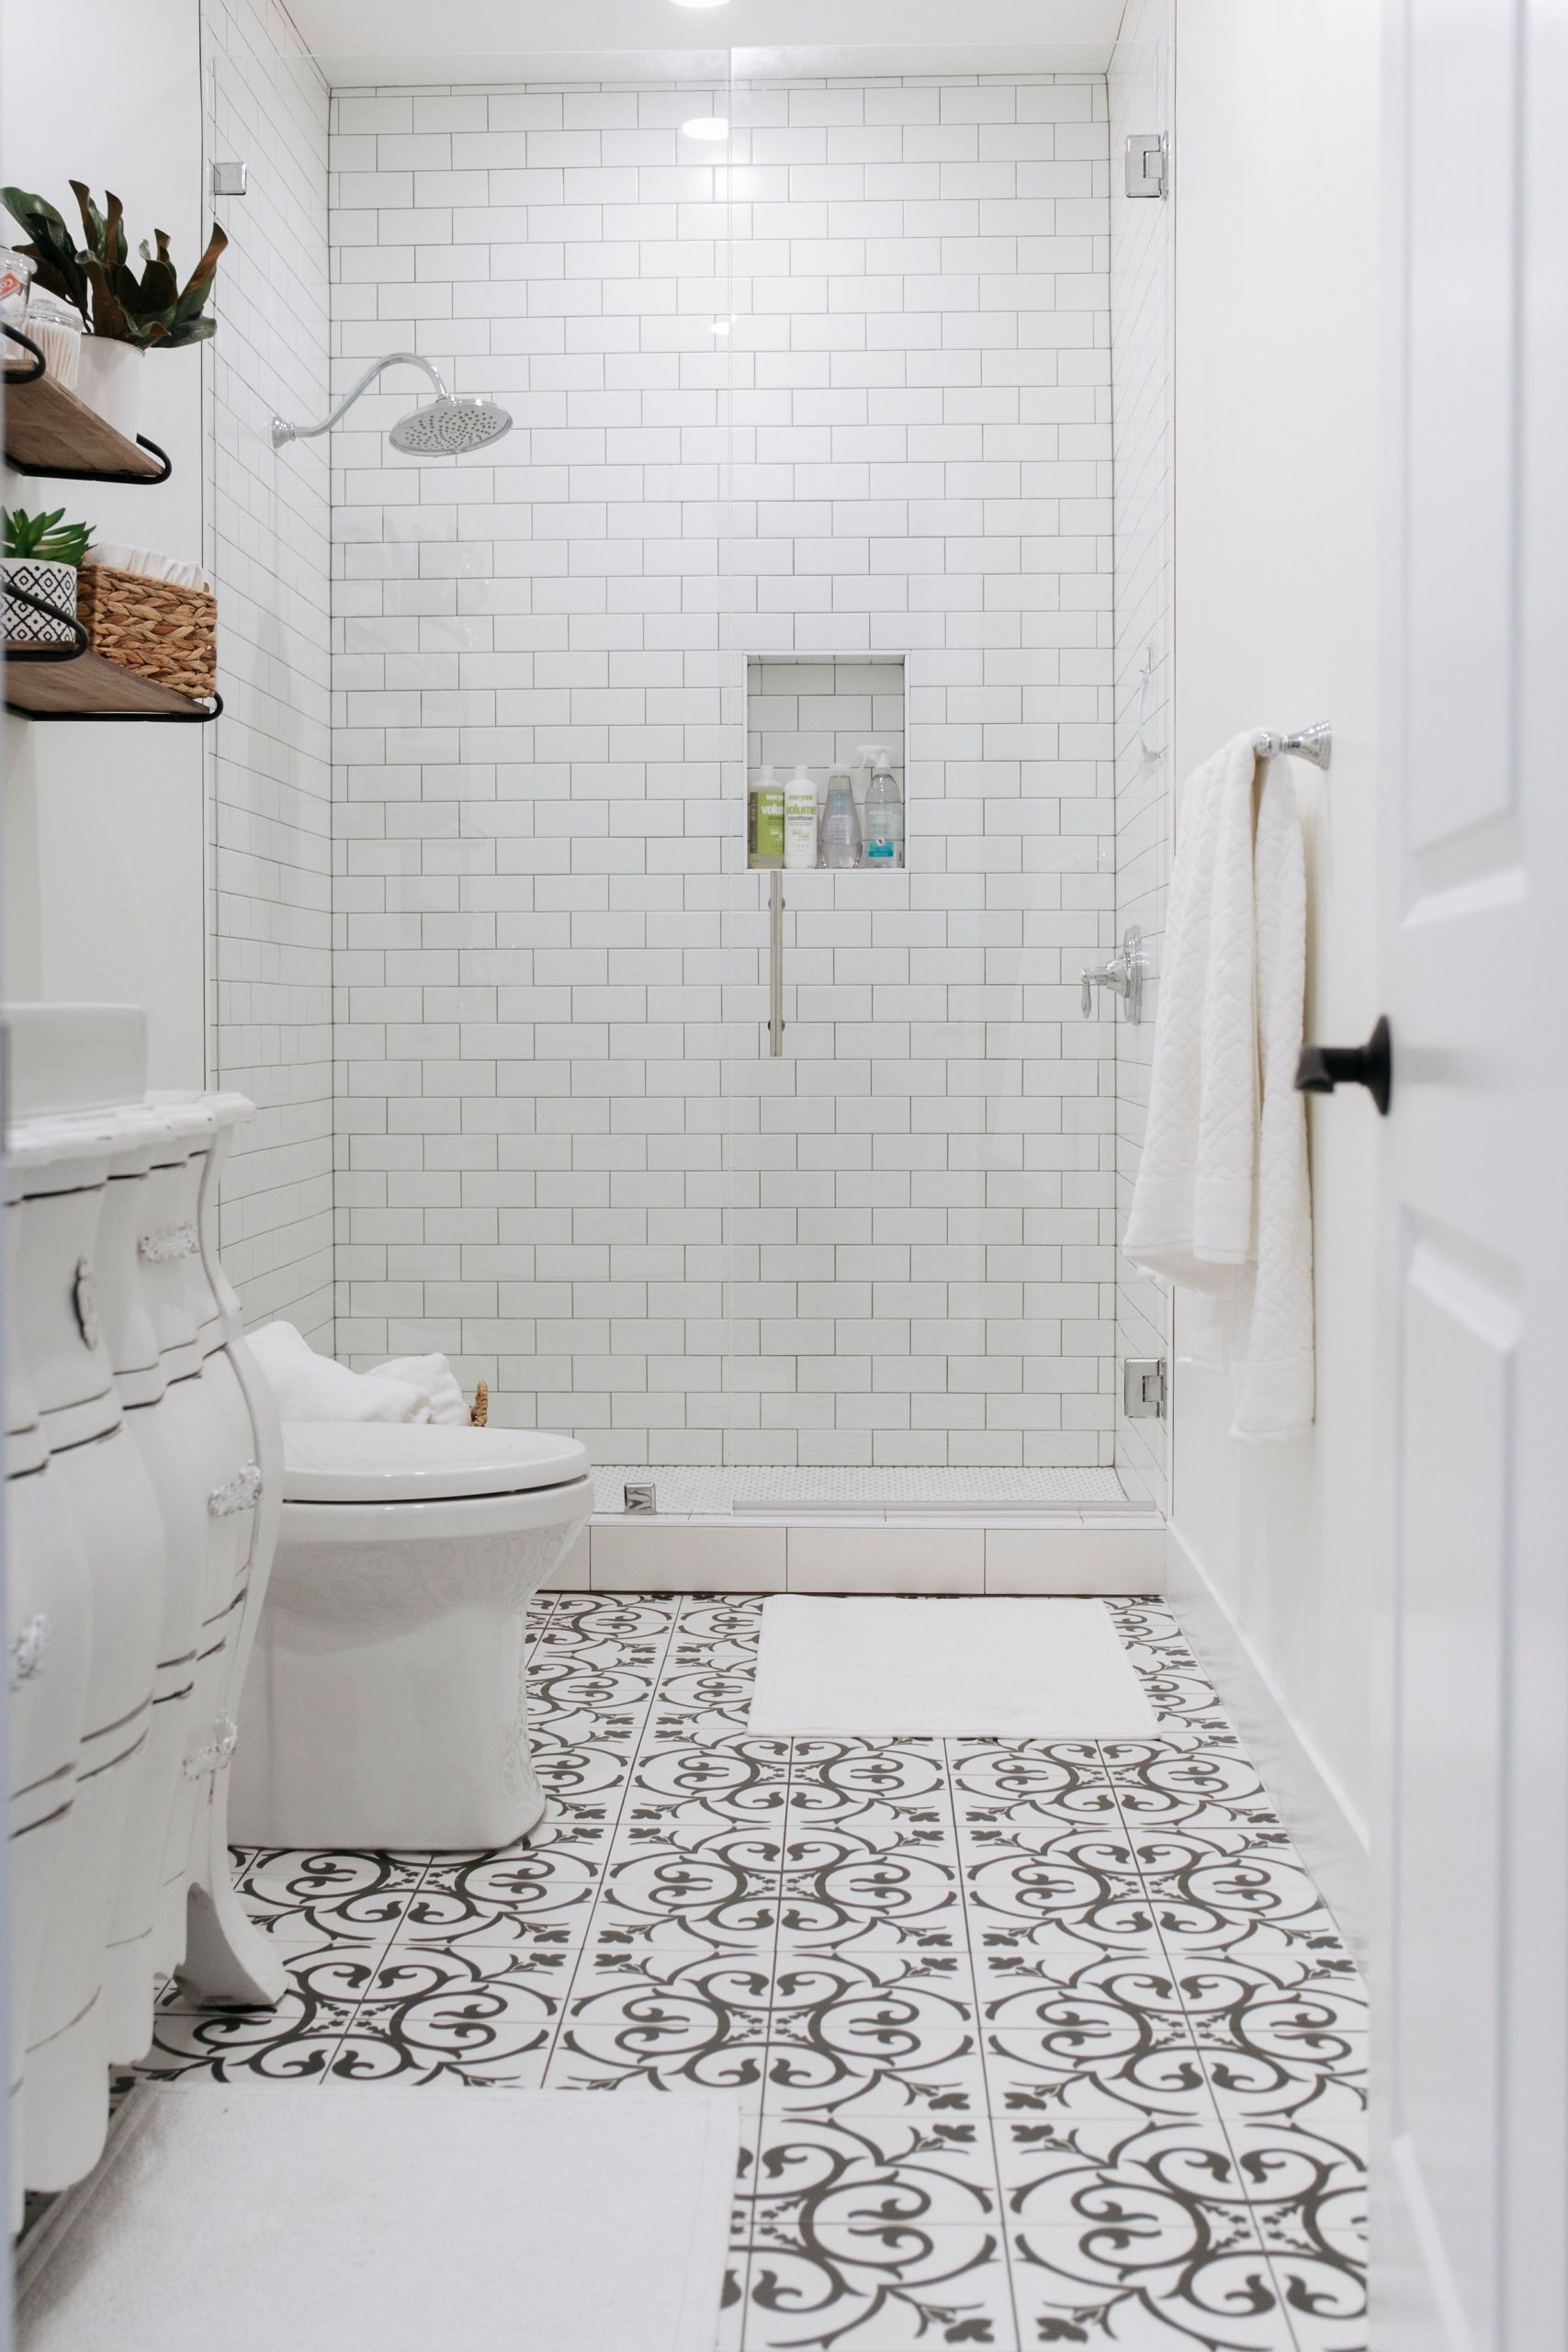 Best Tile For Bathroom
 Basement Bathroom Reveal and the Best Tile of 2018 Oh